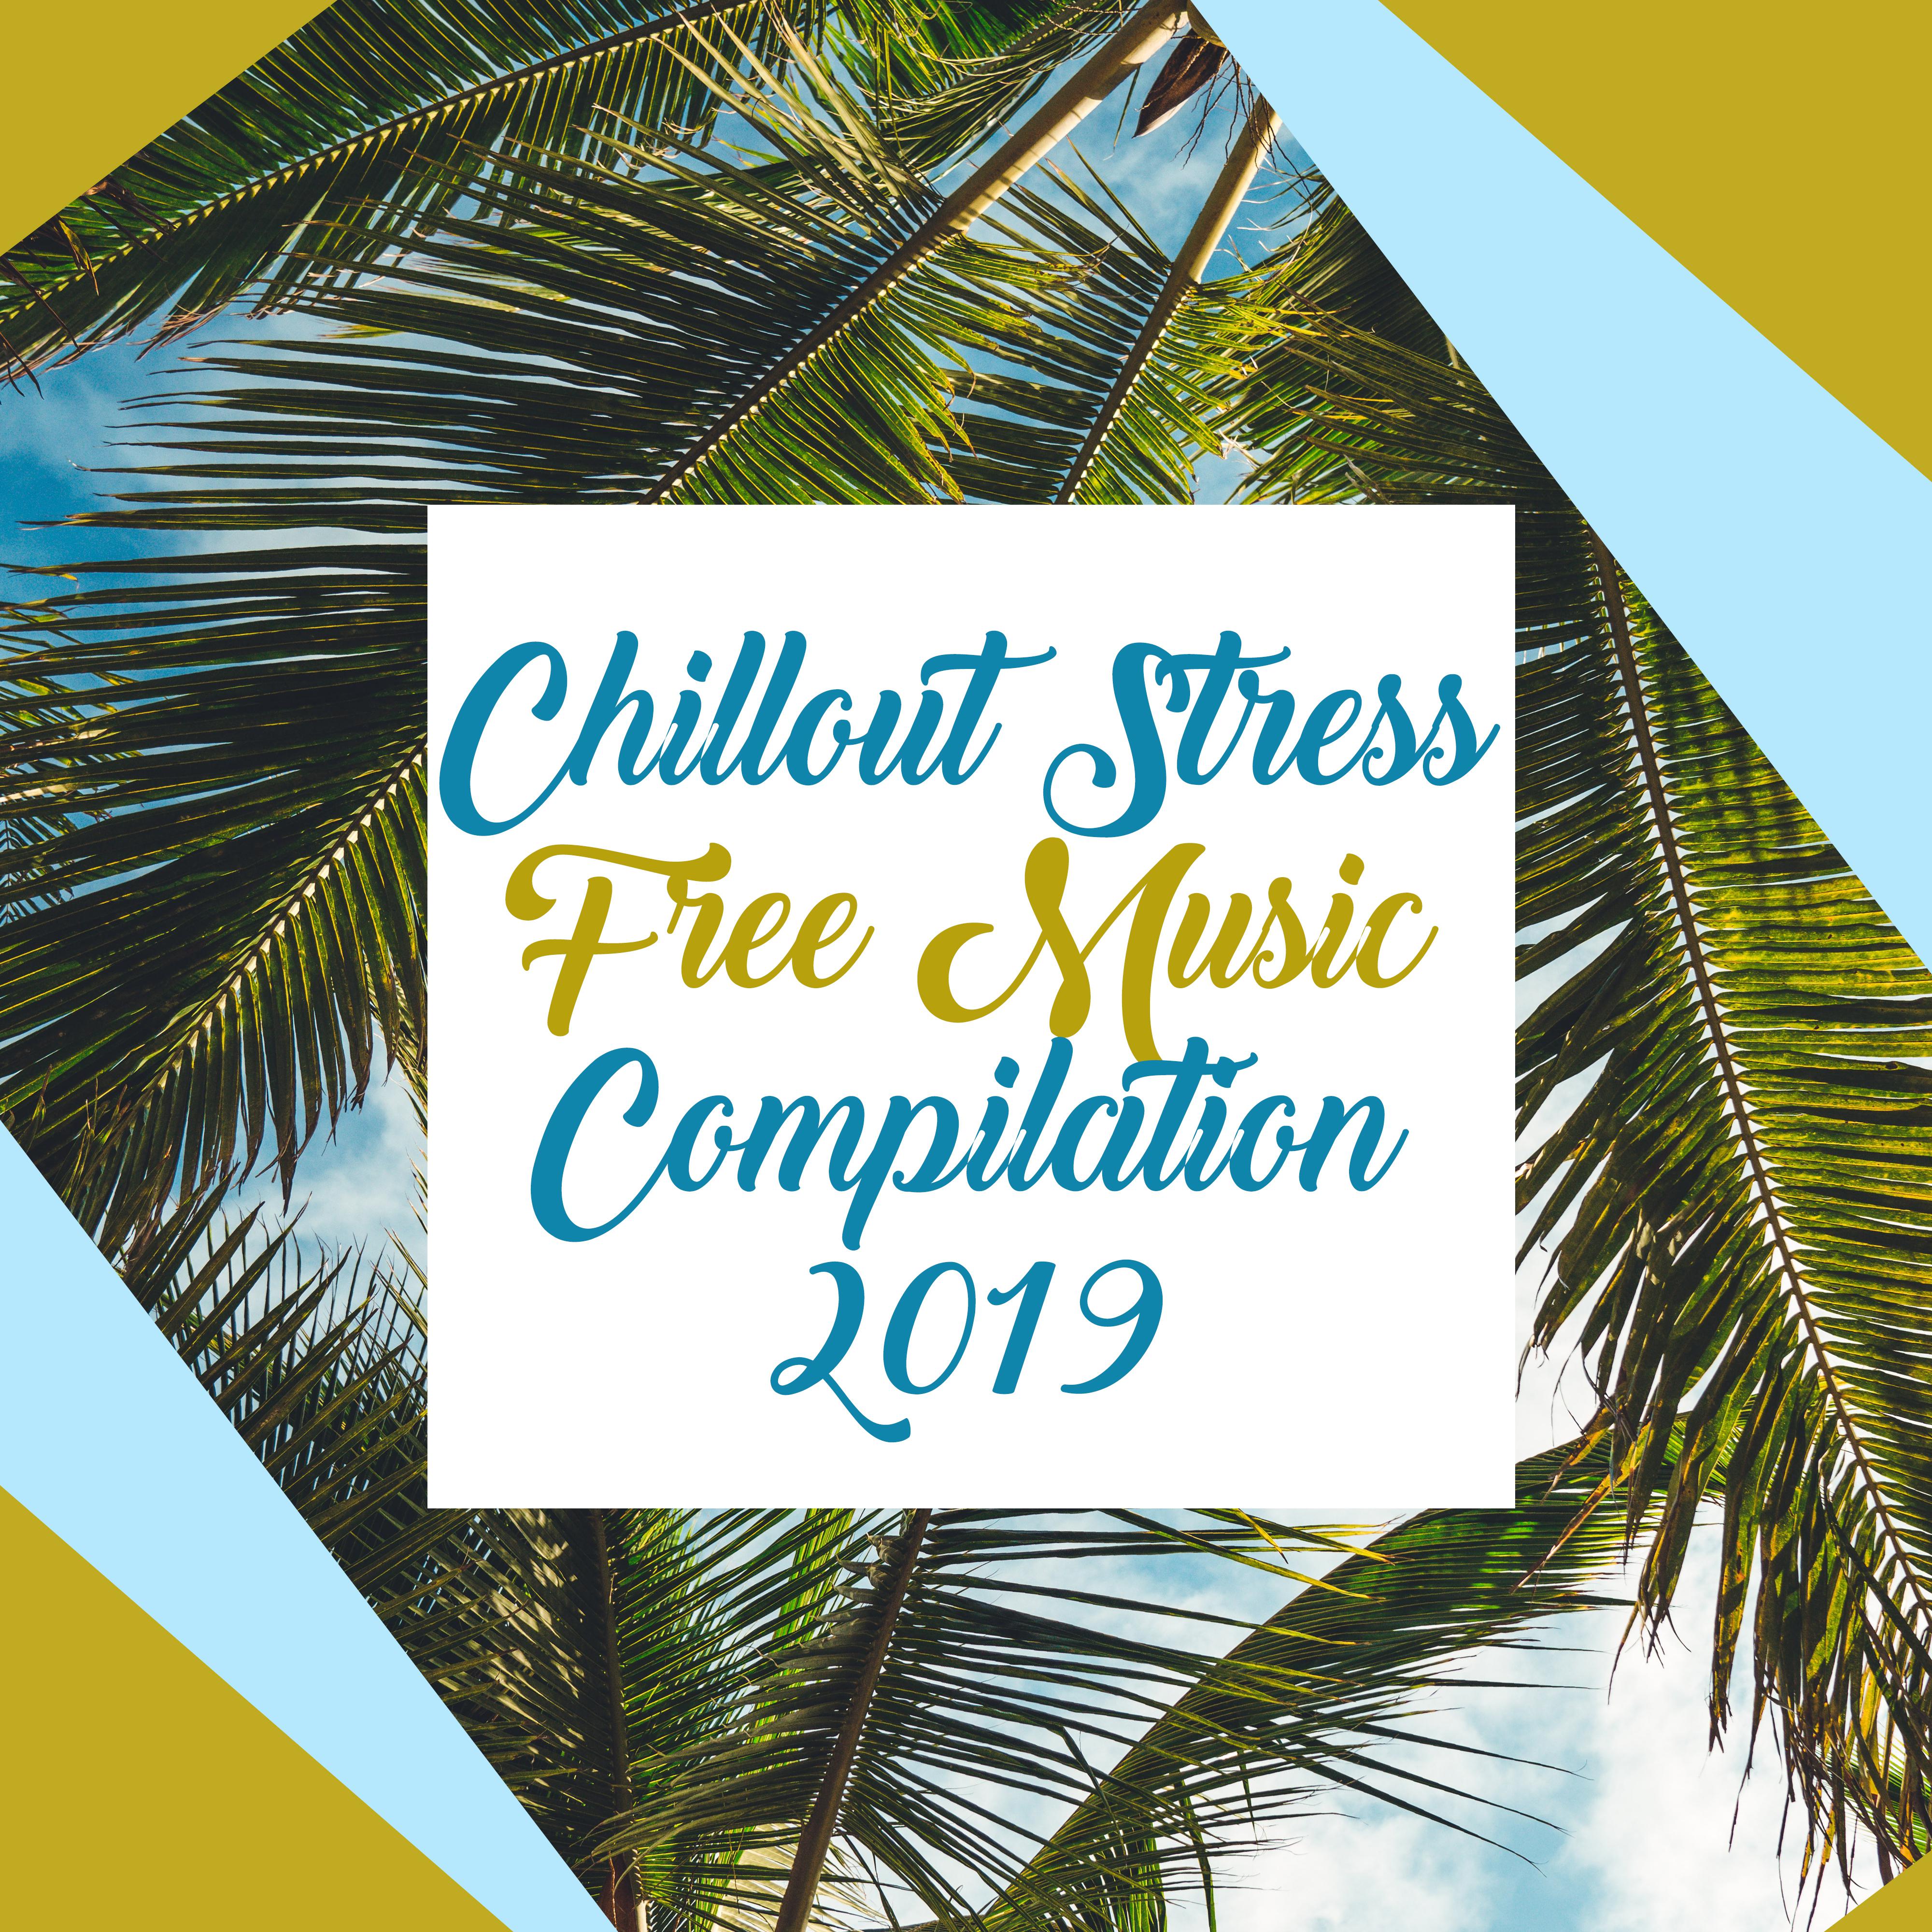 Chillout Stress Free Music Compilation 2019: 15 Soft Summer Beats for Total Relaxation at the Beach or Home